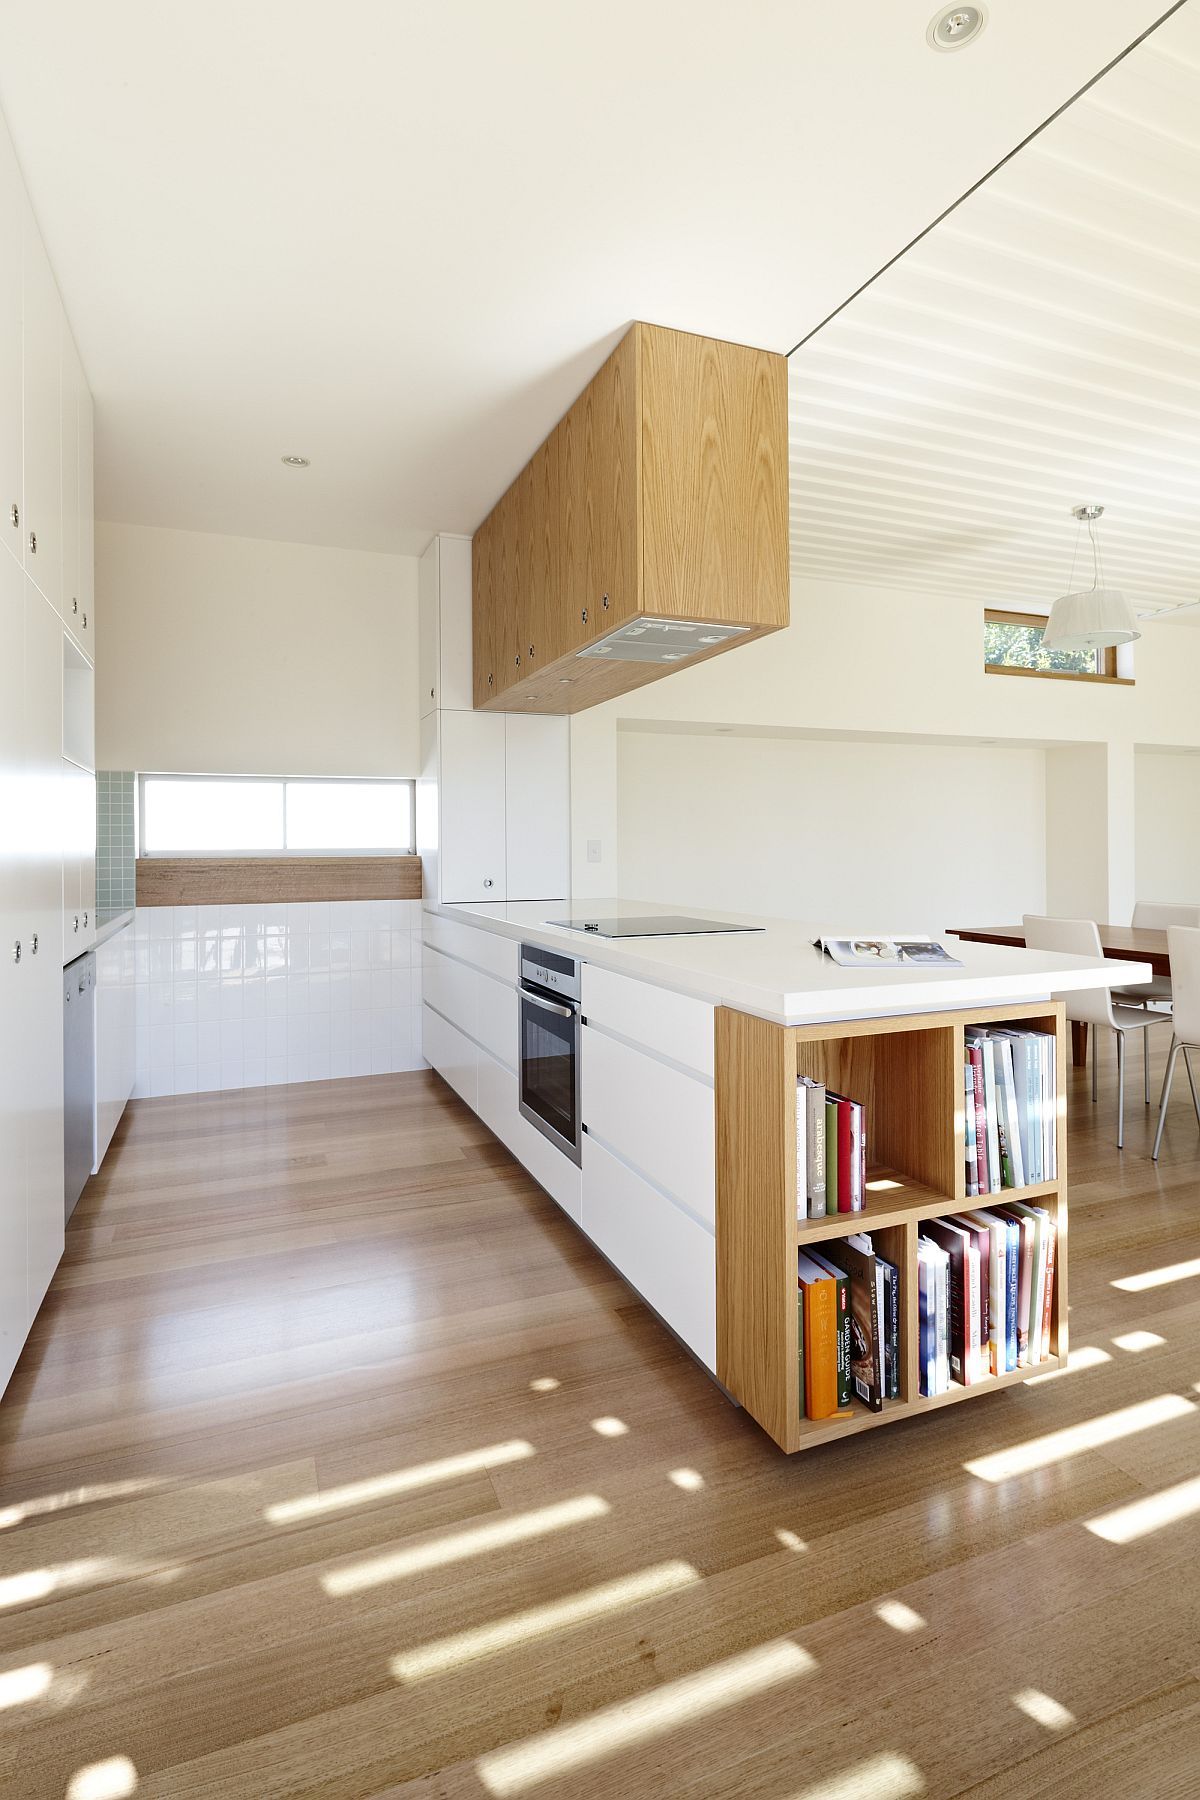 New-design-of-the-house-brings-natural-light-into-the-smart-St